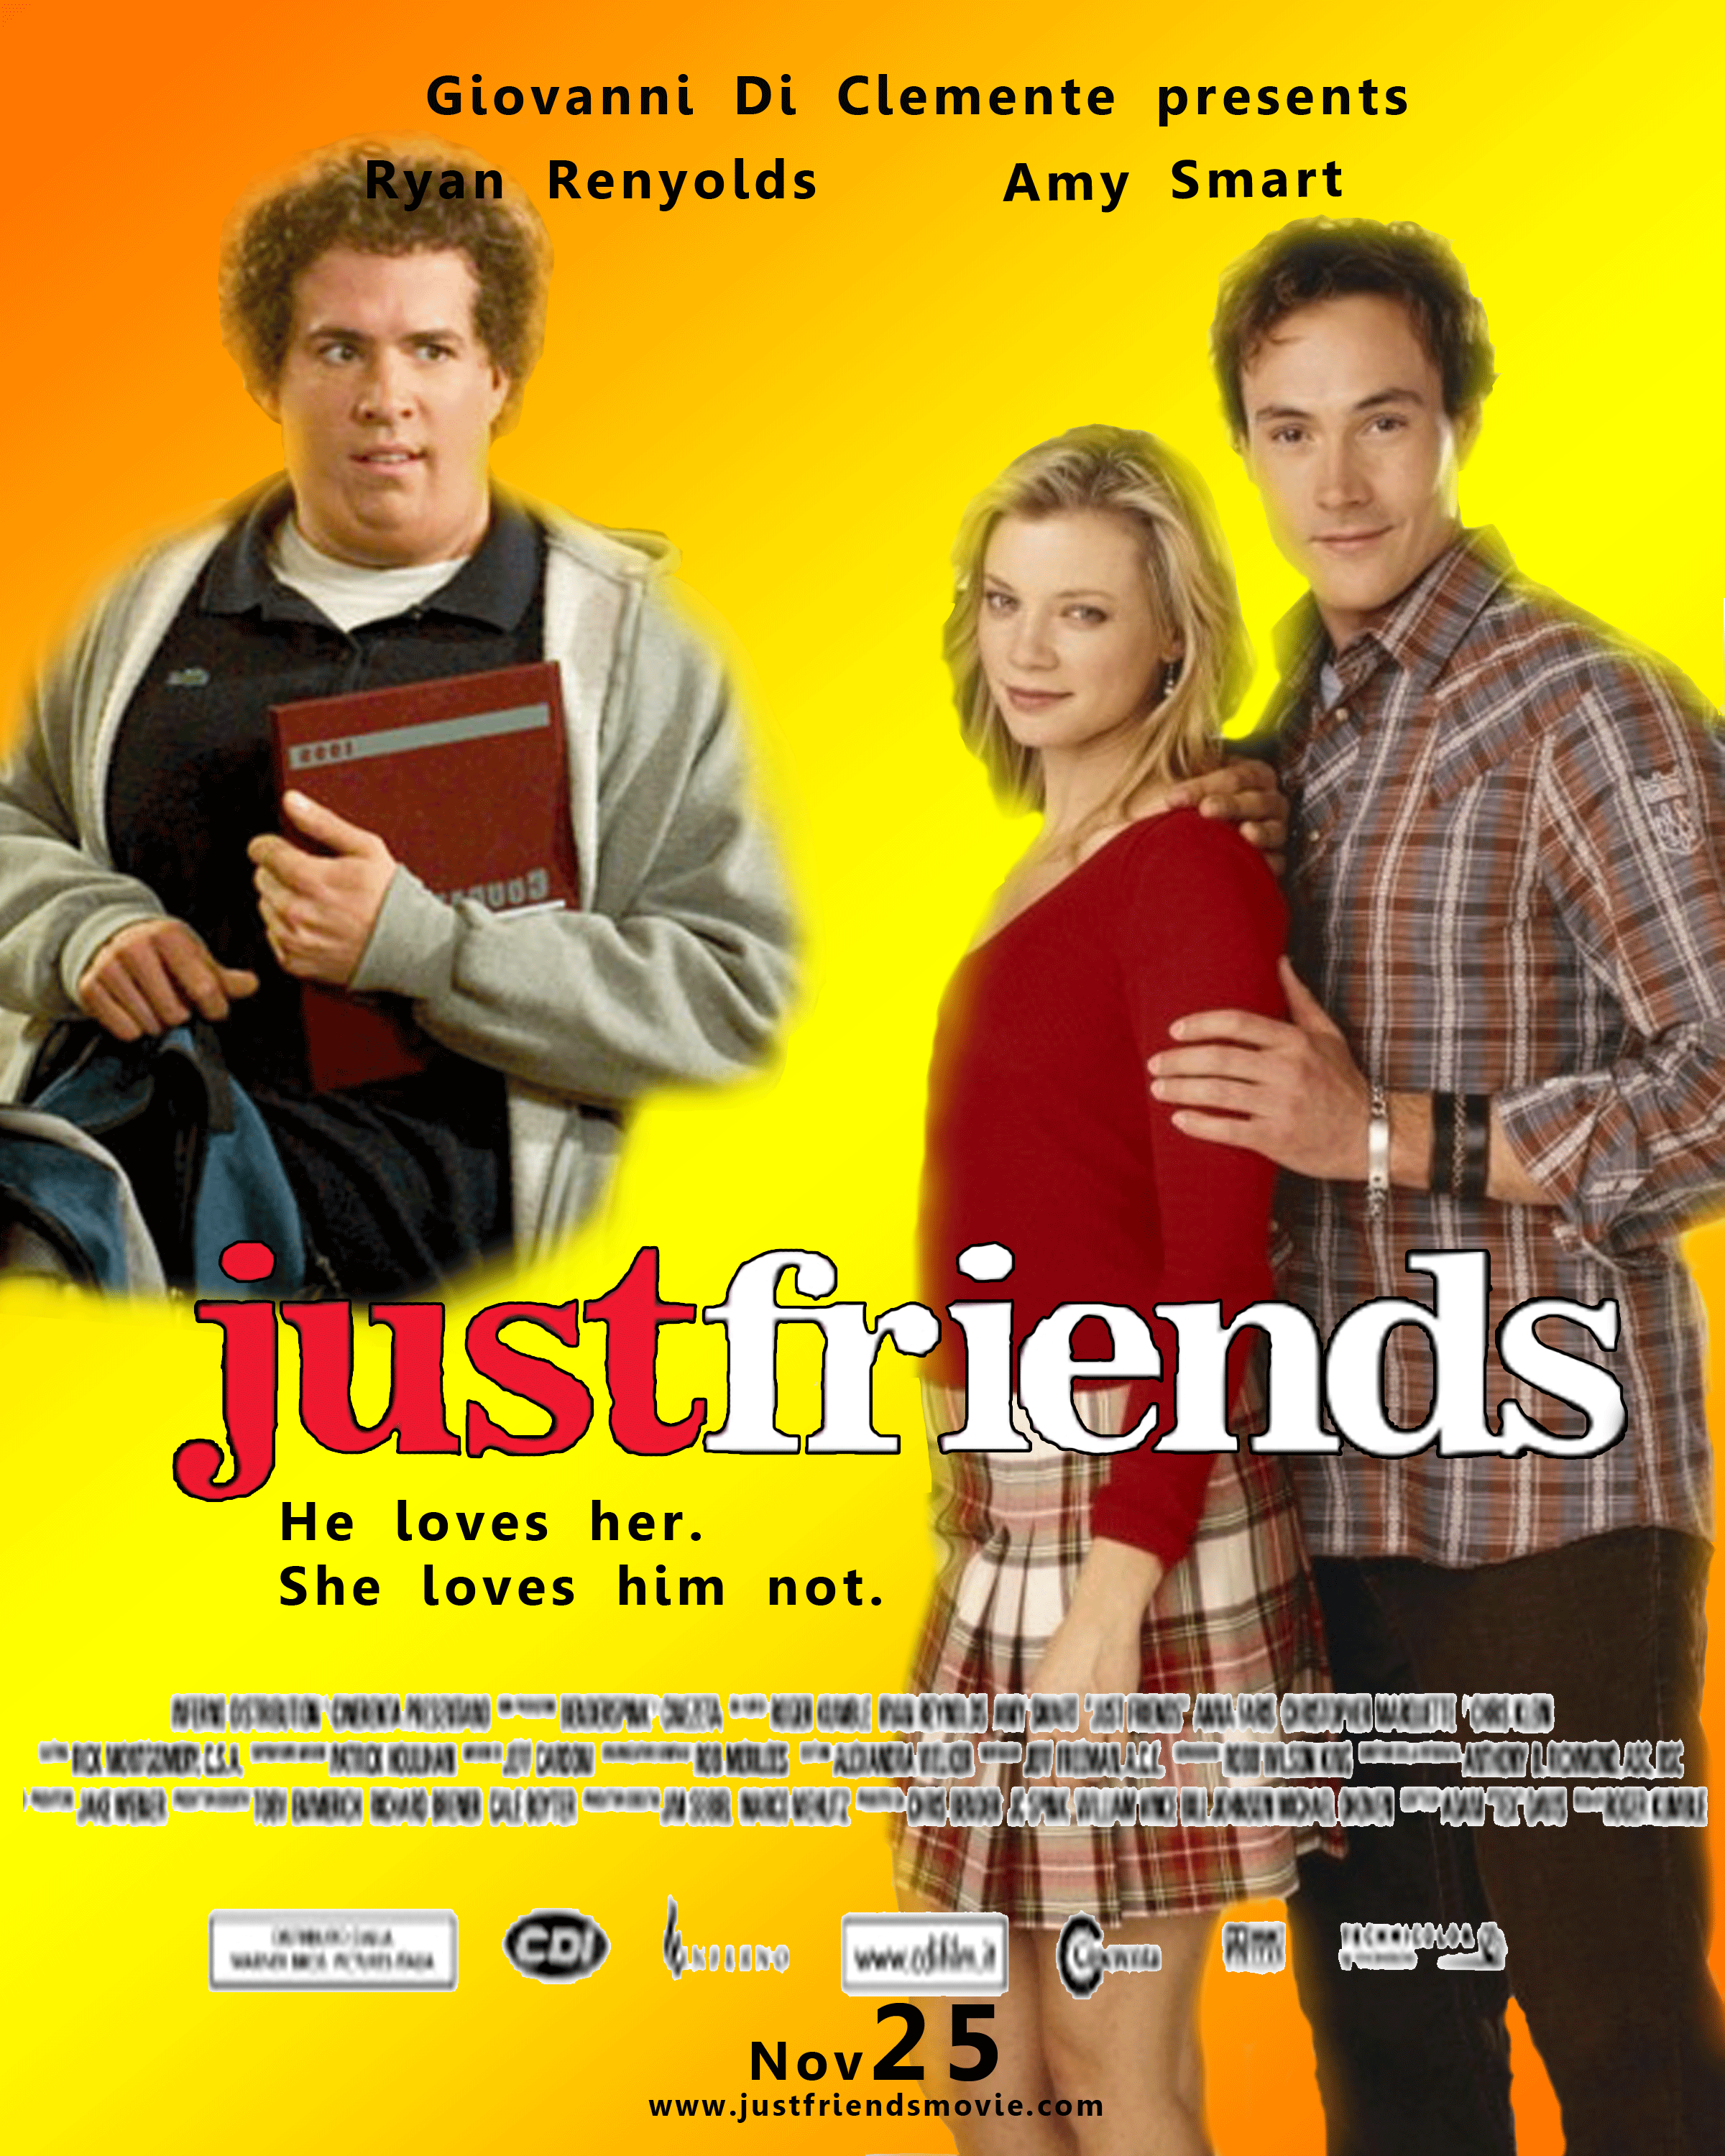 just-friends-movie-assignment2.gif